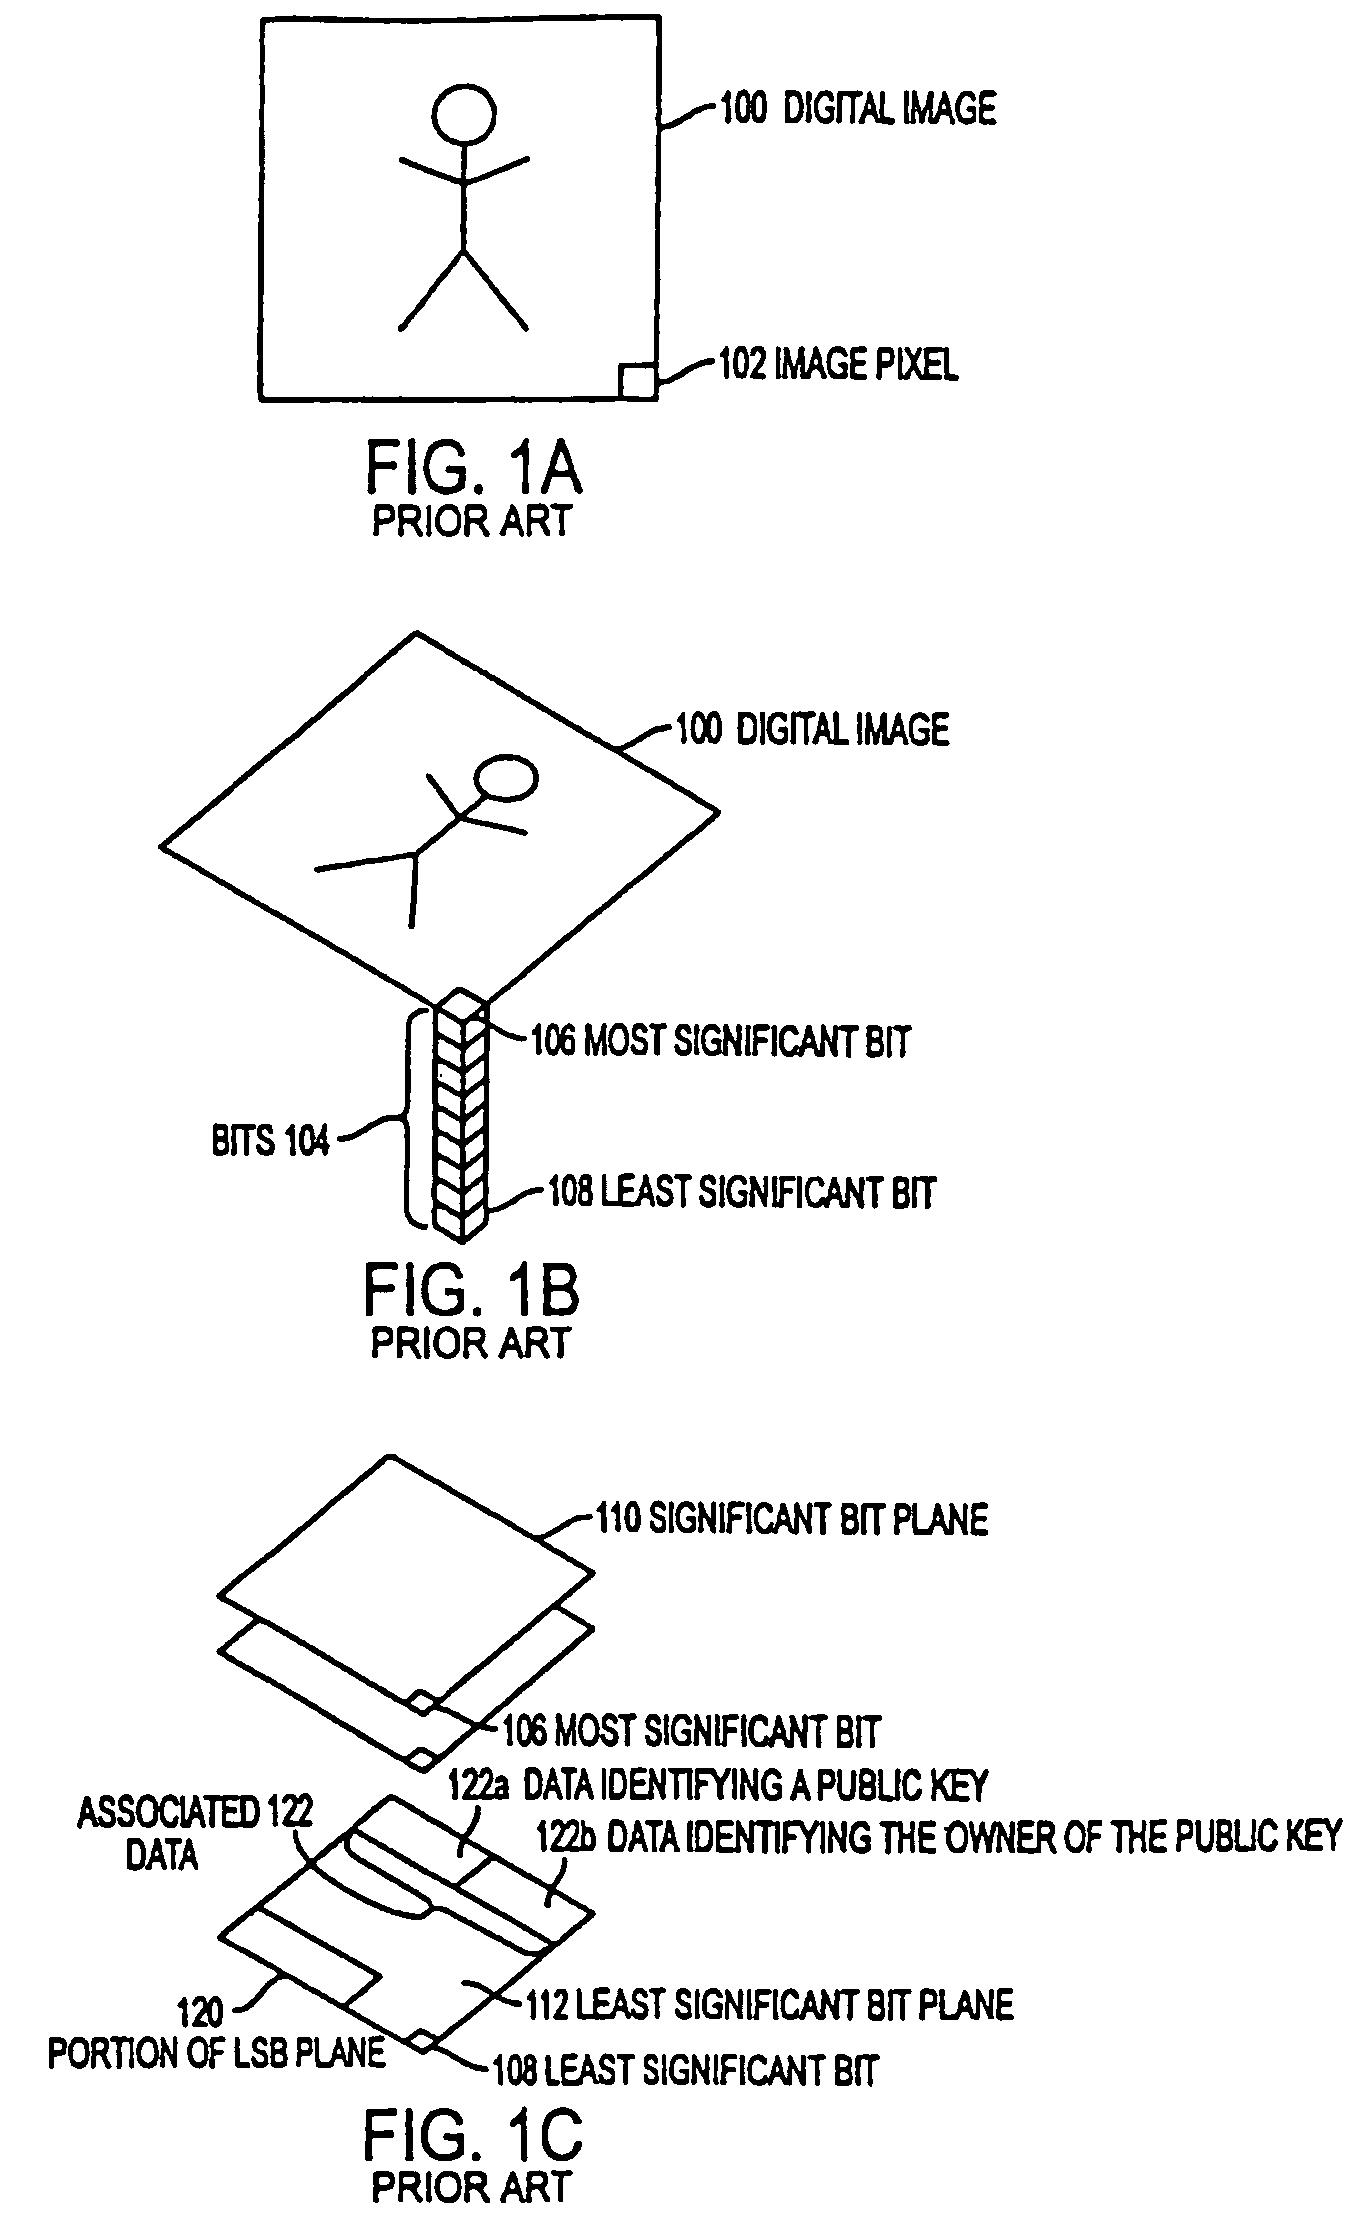 Method and device for inserting and authenticating a digital signature in digital data